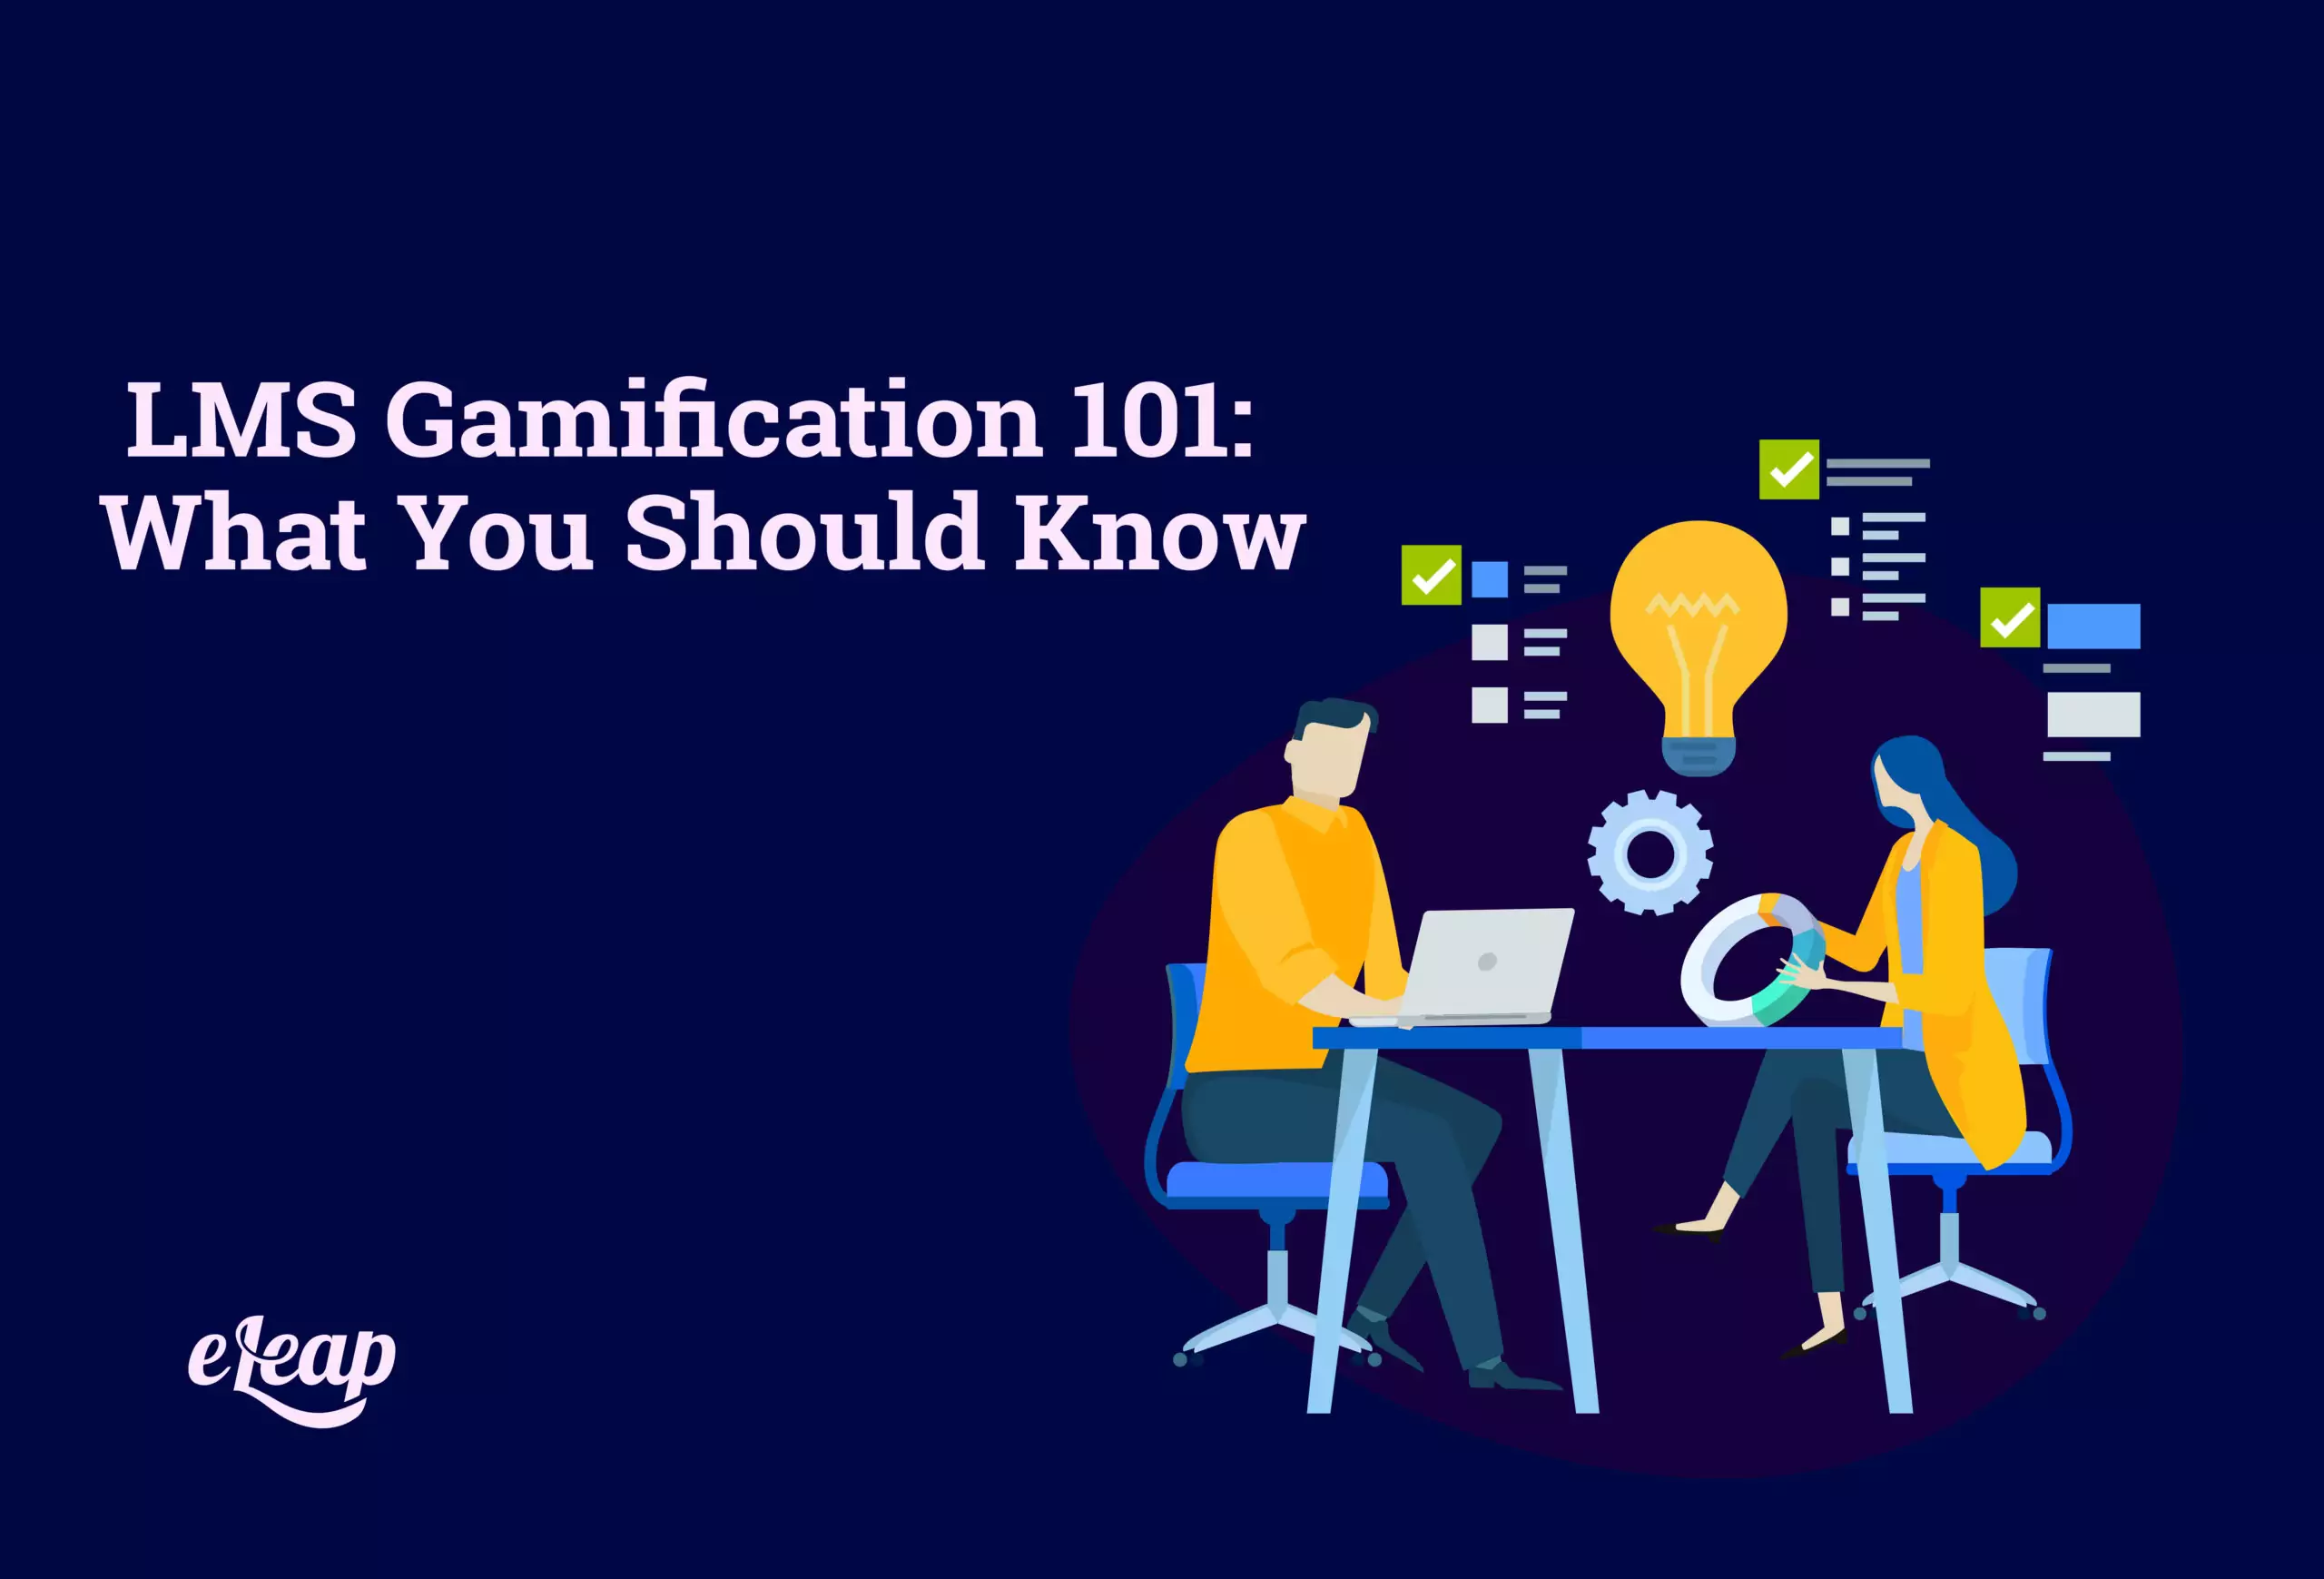 LMS Gamification 101: What You Should Know